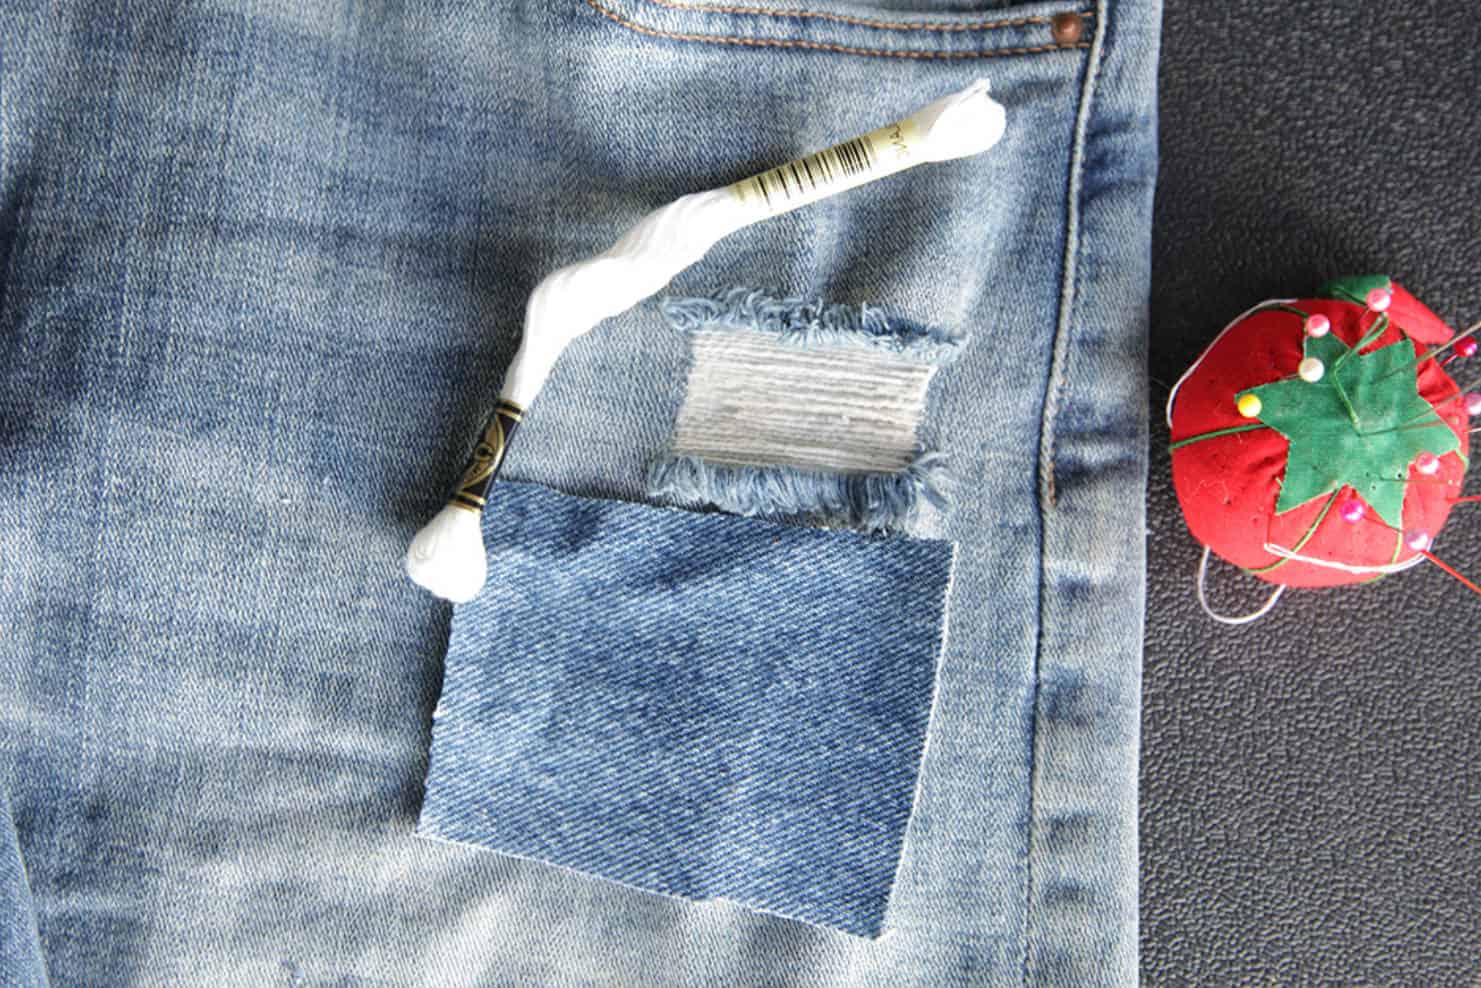 how to fix a hole in a sweater without sewing